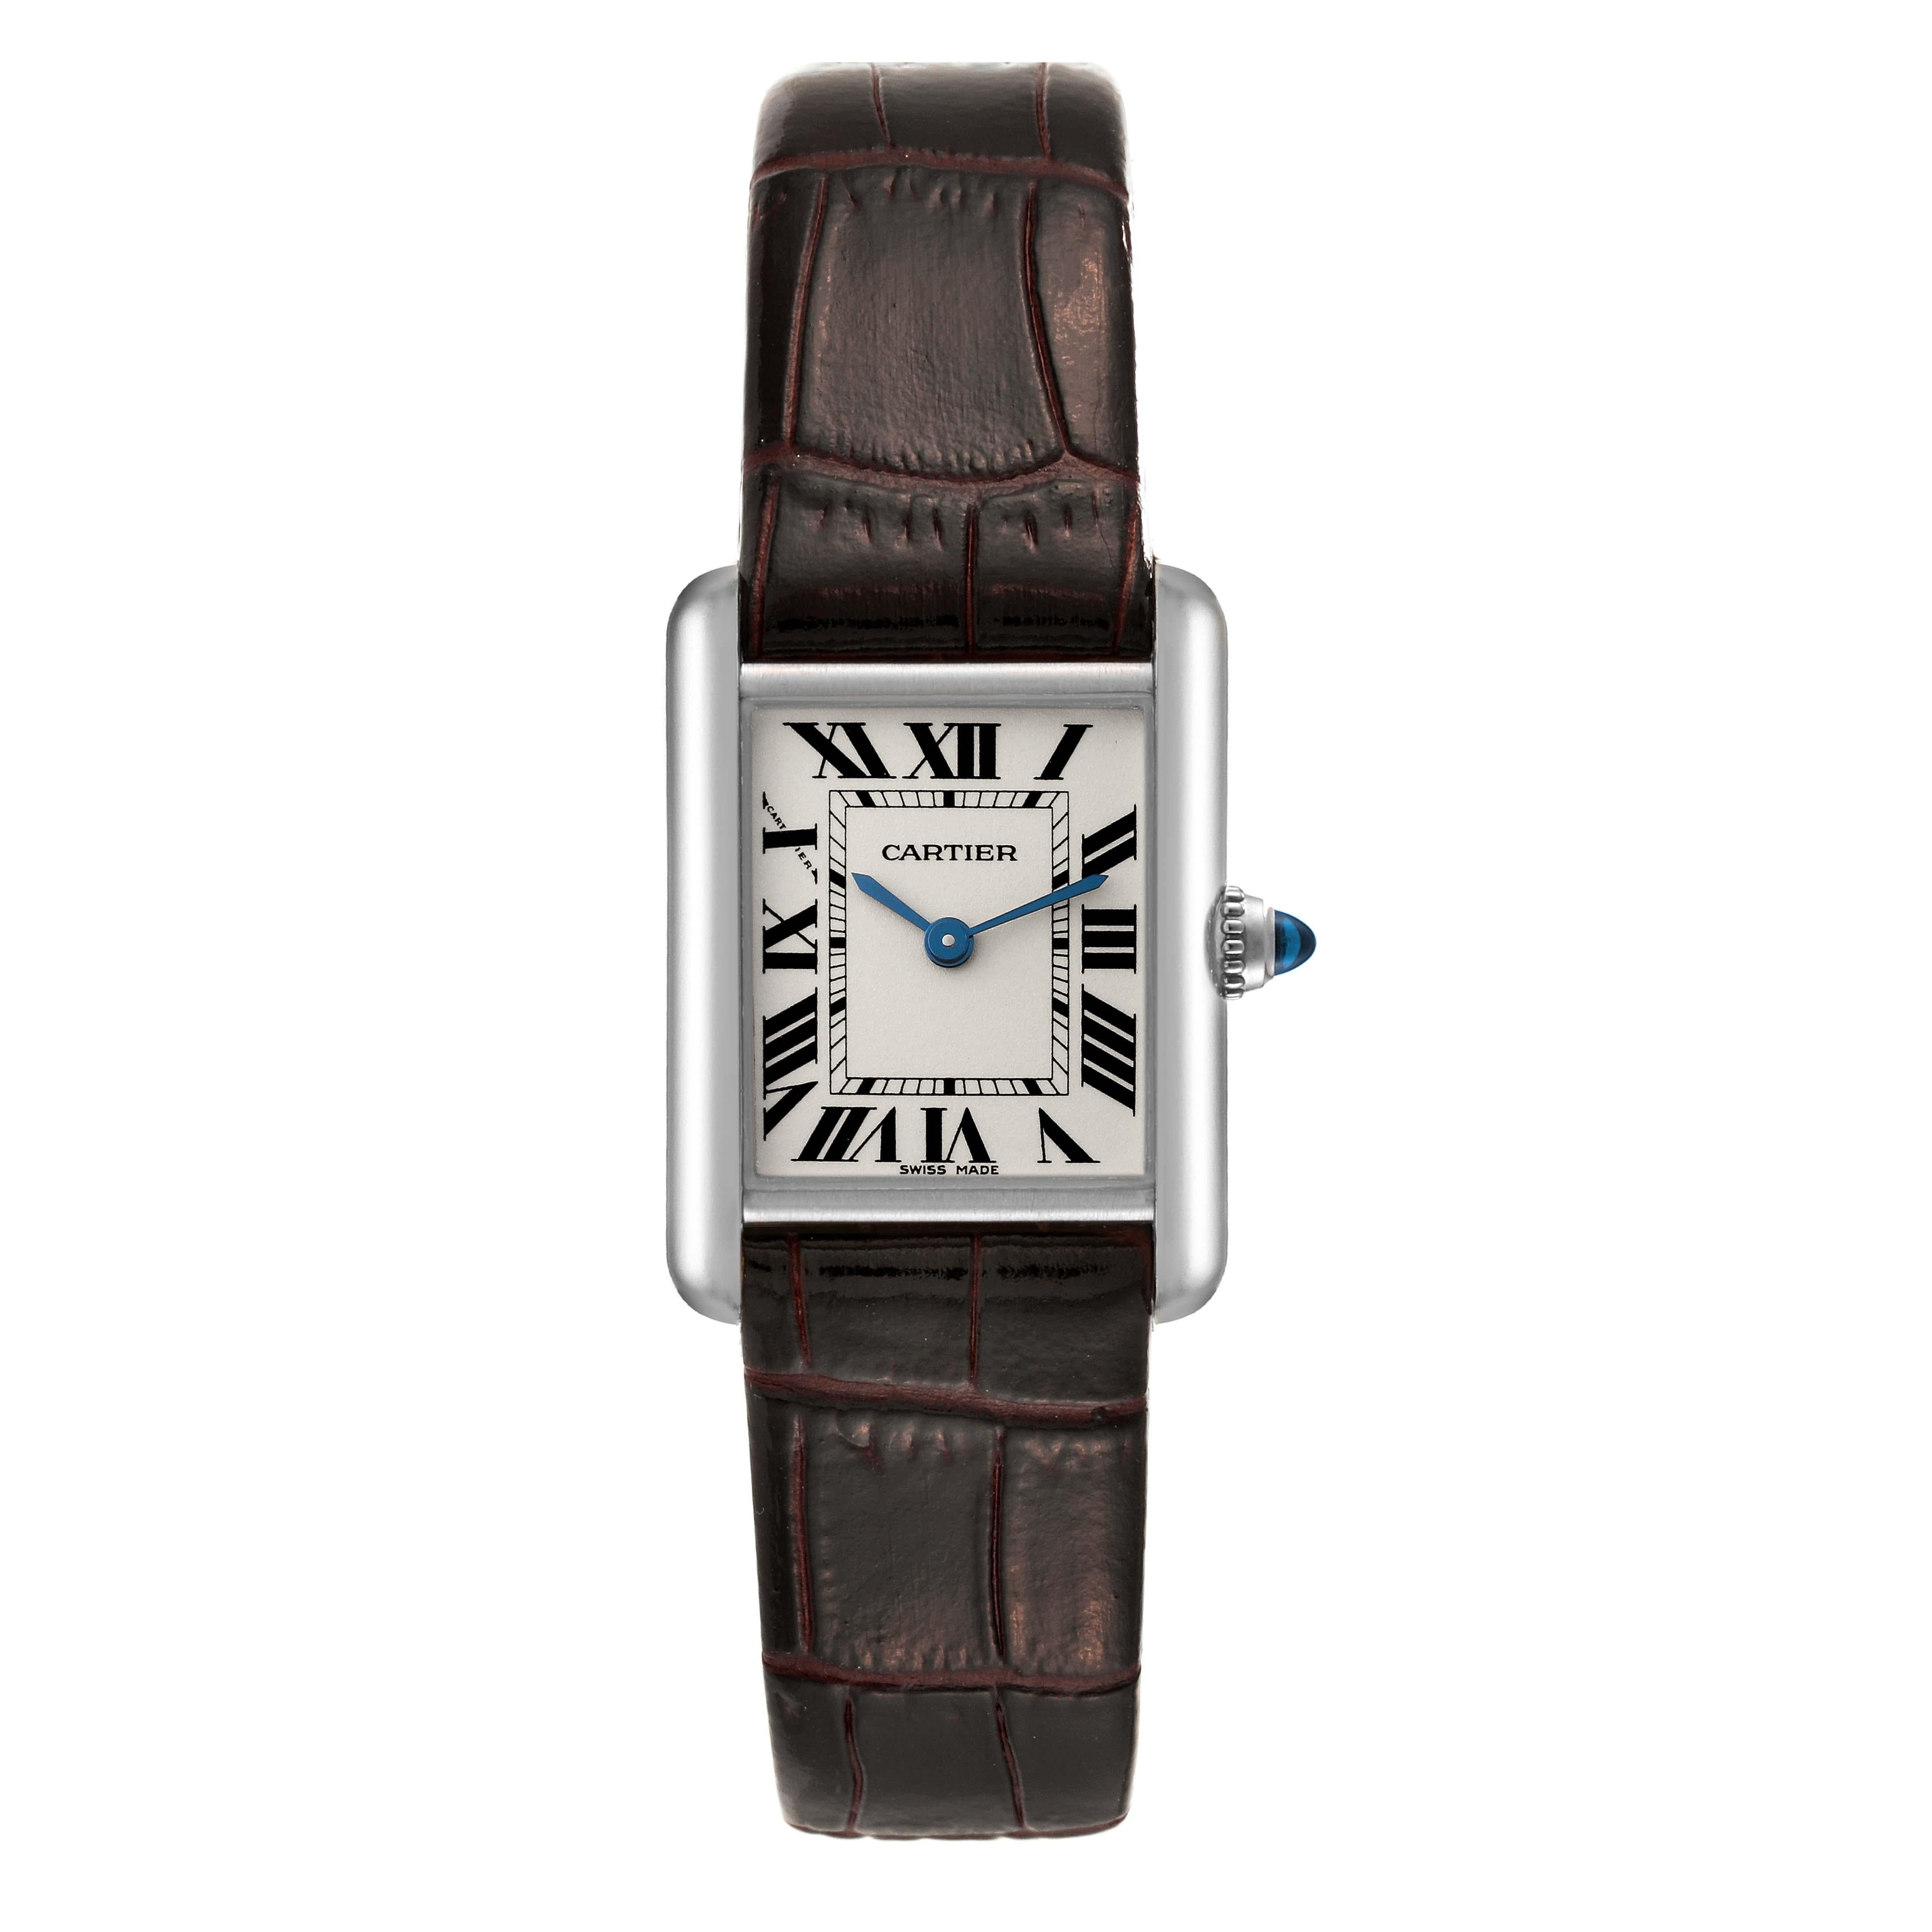 Cartier Tank Louis White Gold Brown Strap Ladies Watch W1541056. Quartz movement. 18K white gold case 22 mm x 29 mm. Circular grained crown set with a blue sapphire cabochon. . Scratch resistant sapphire crystal. Silver grained dial with black Roman